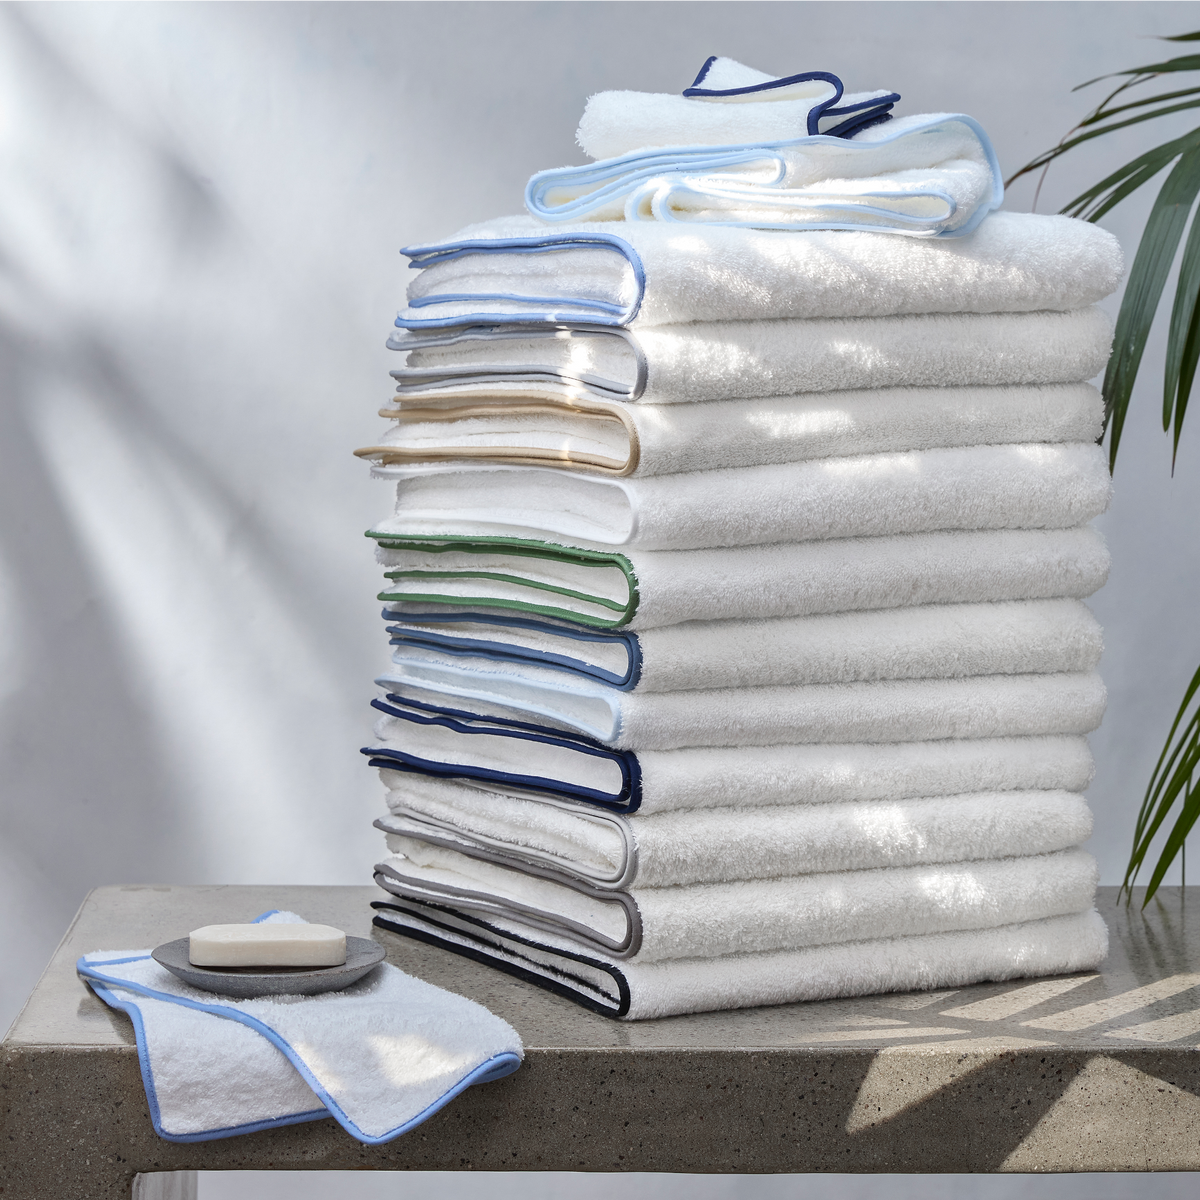 Stack of White Matouk Cairo Bath Towels with Different Colors of Accent Piping